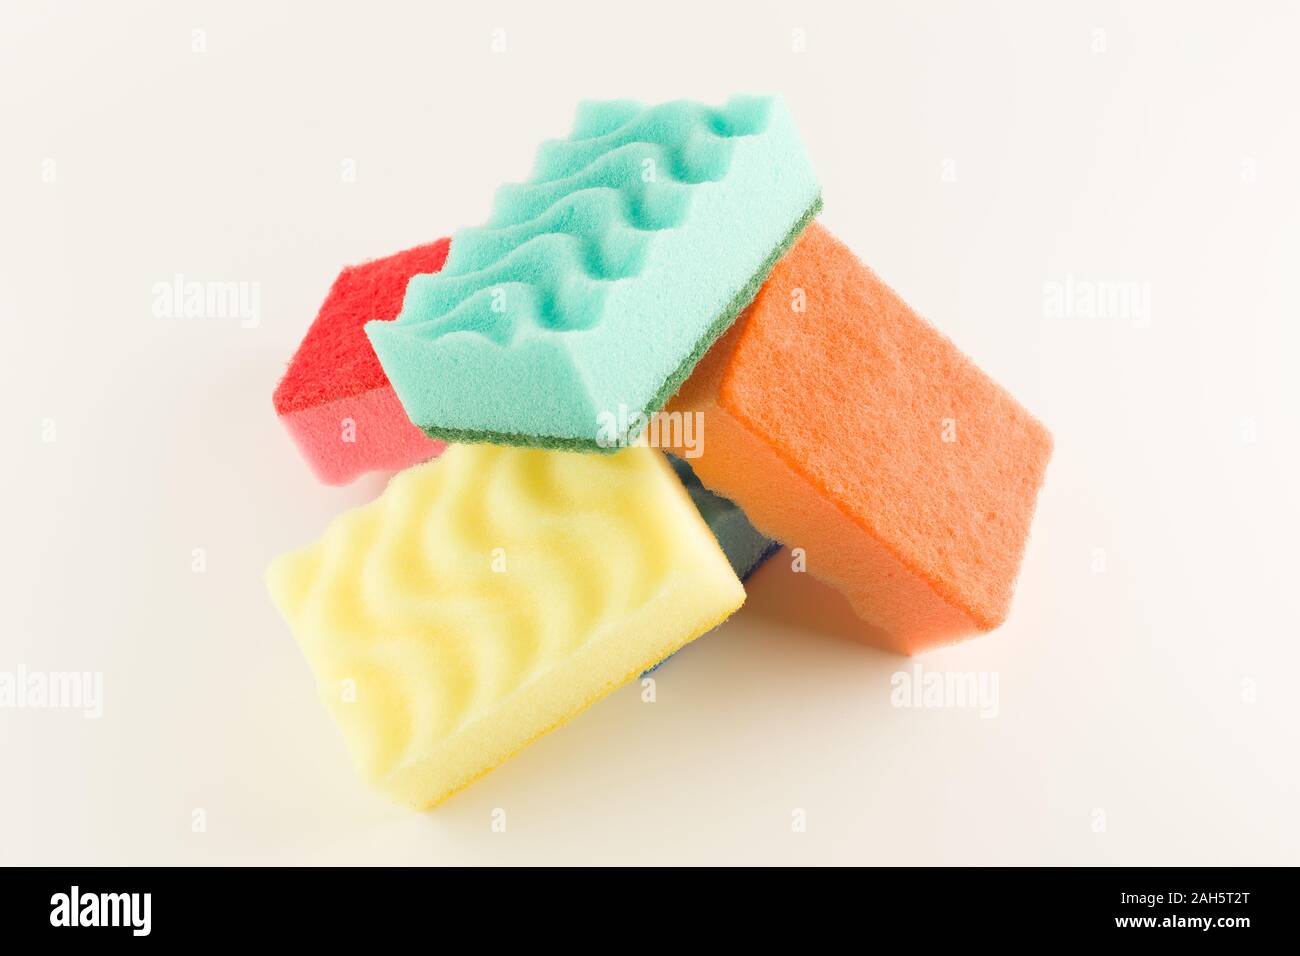 colorful foam rubber sponges isolated on a white background for washing dishes Stock Photo